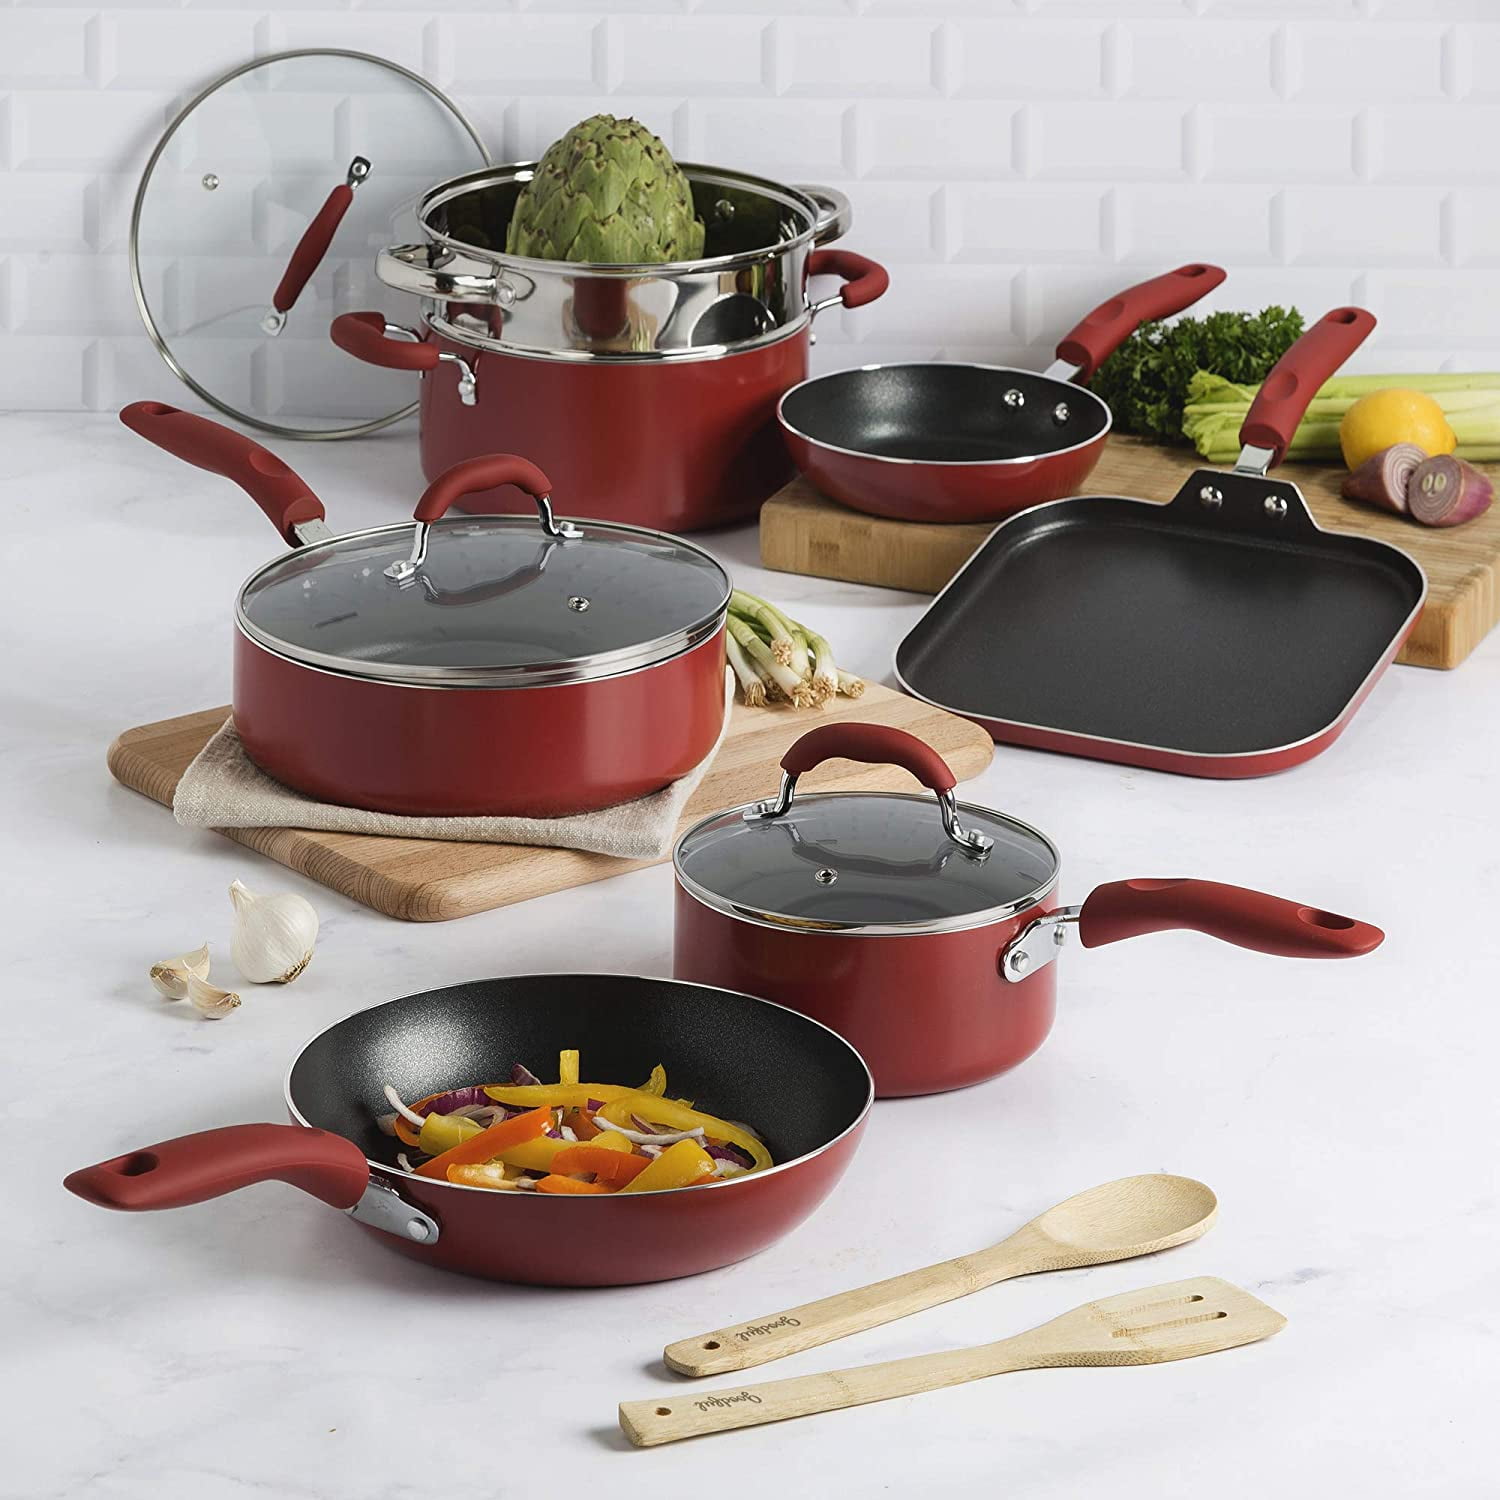 Goodful Cookware Set with Premium Non-Stick Coating, Dishwasher Safe P –